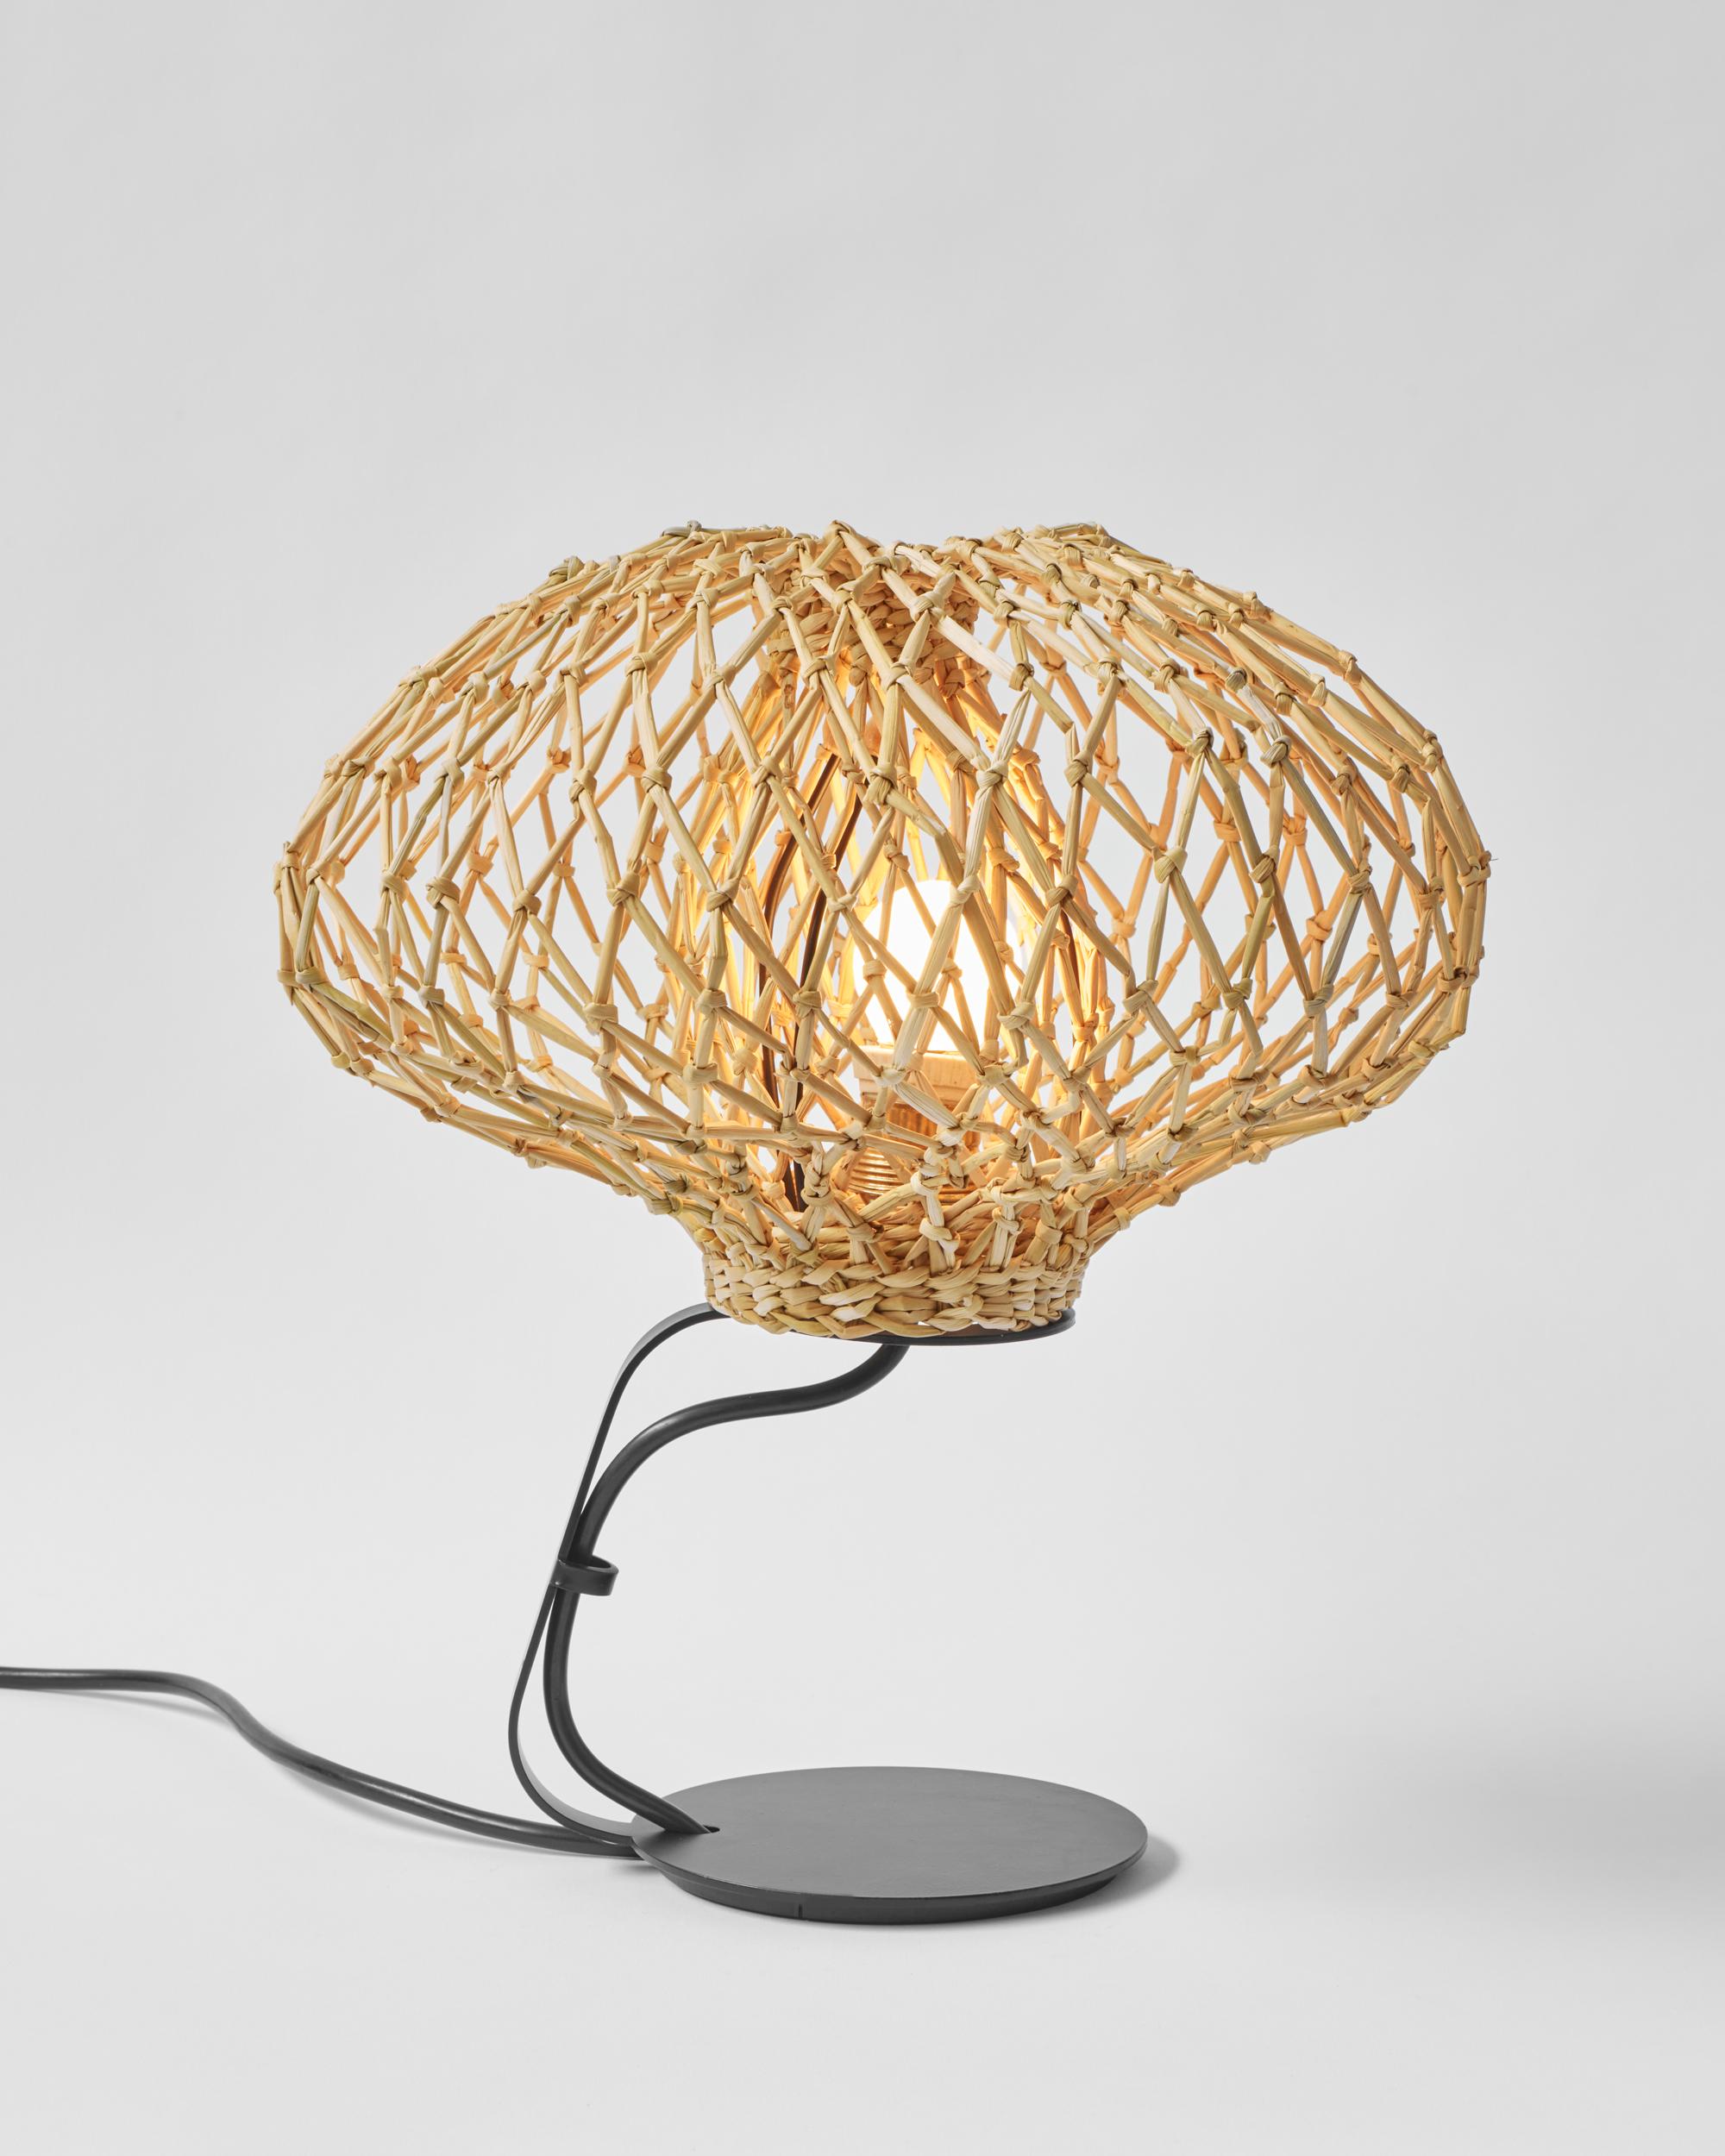 Hand-Woven Set of 2 Vegetable Fabrics N°6 Nest Table Lamps by Estudio Rafael Freyre For Sale